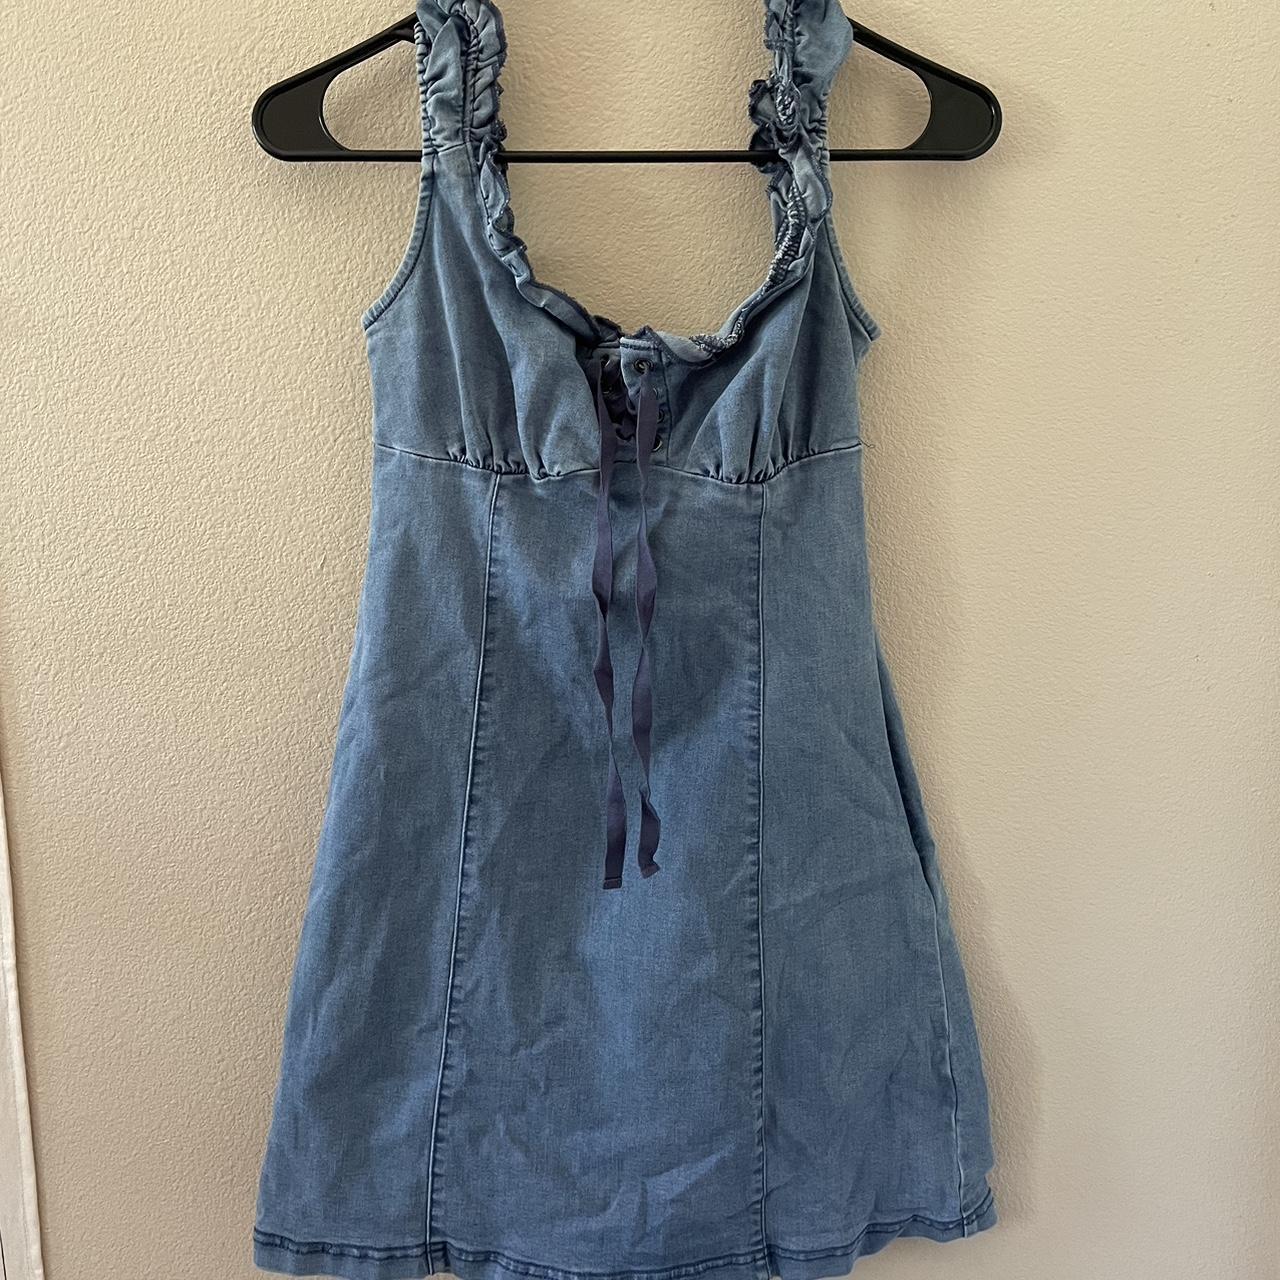 urban outfitters denim dress size small ⚠️⚠️going to... - Depop